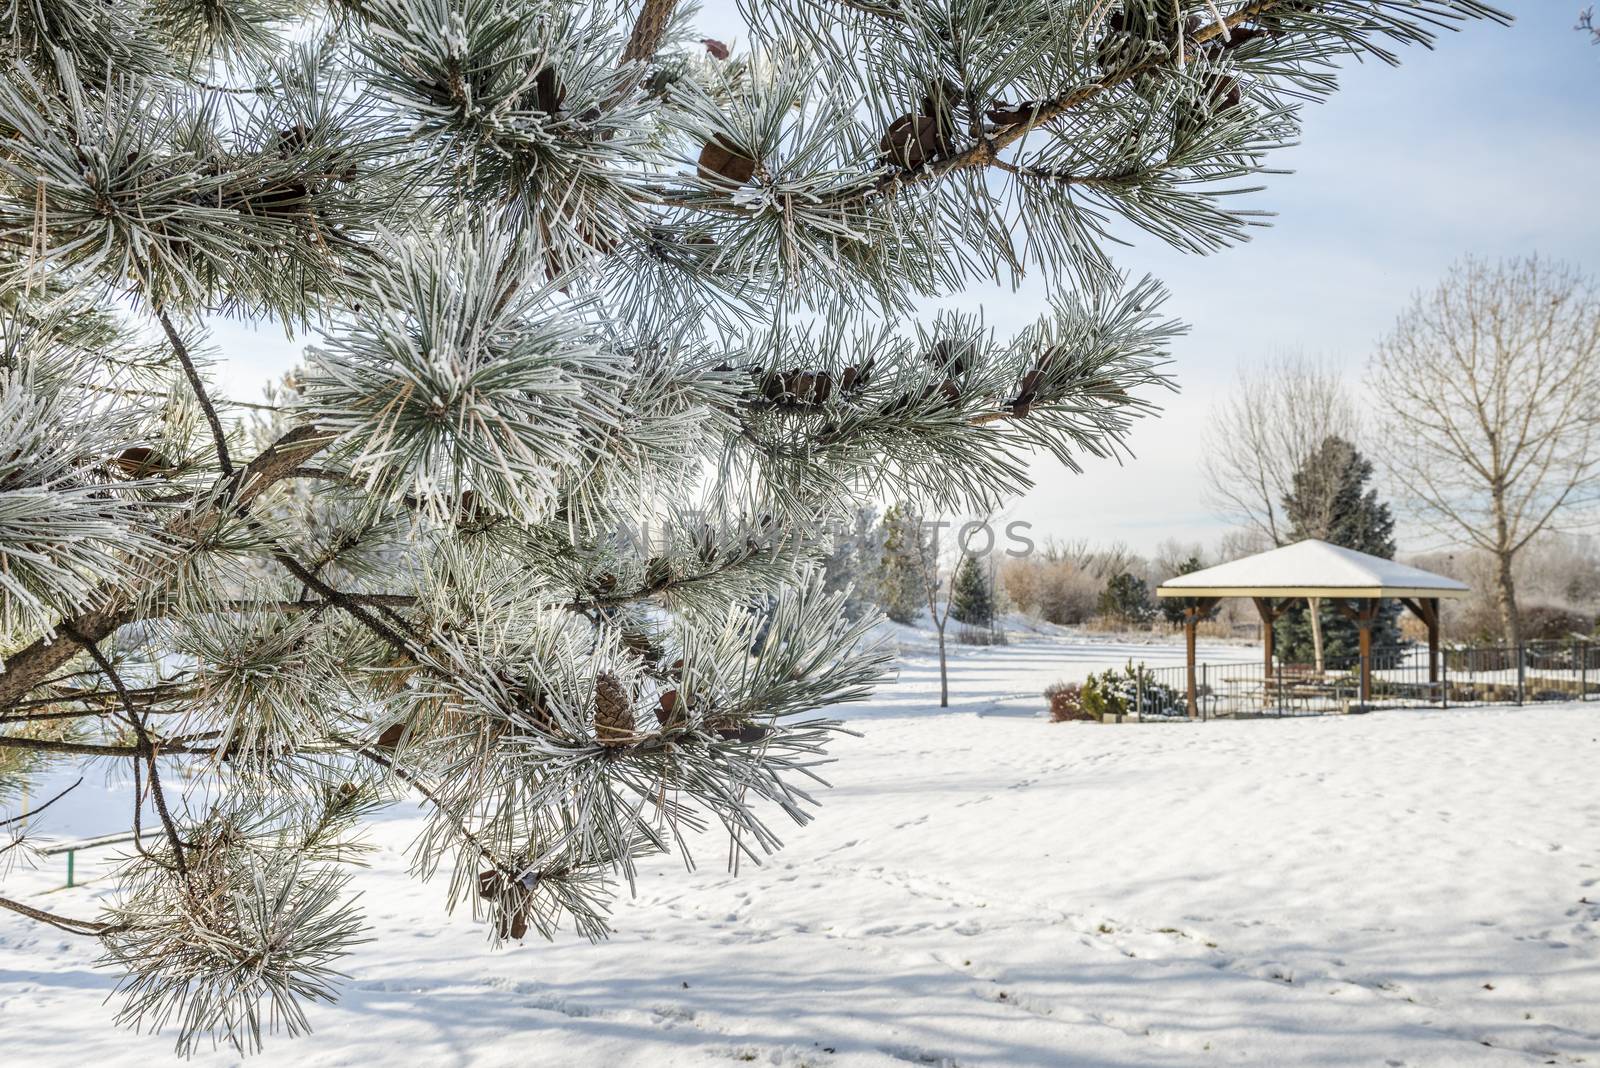 Frost-covered pine tree in a park with a gazebo in winter by Njean